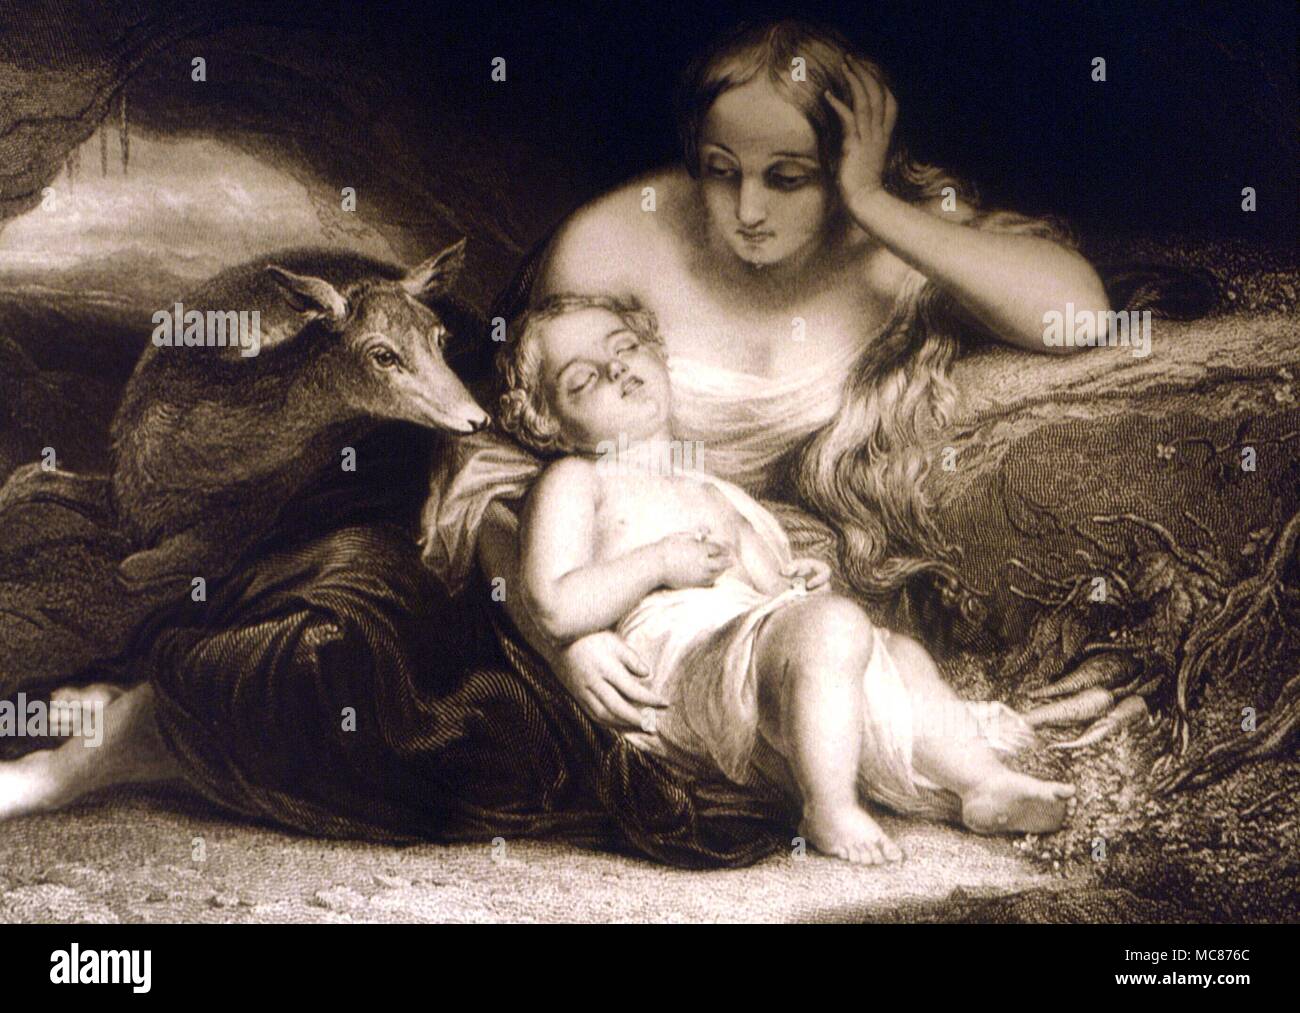 STRANGE PHENOMENA Genevieve of Brabant A deserted mother and her child are tended by a Hind. Engraving by JC Armytage, after a painting by Wappers. Art Journal, 1856 Stock Photo